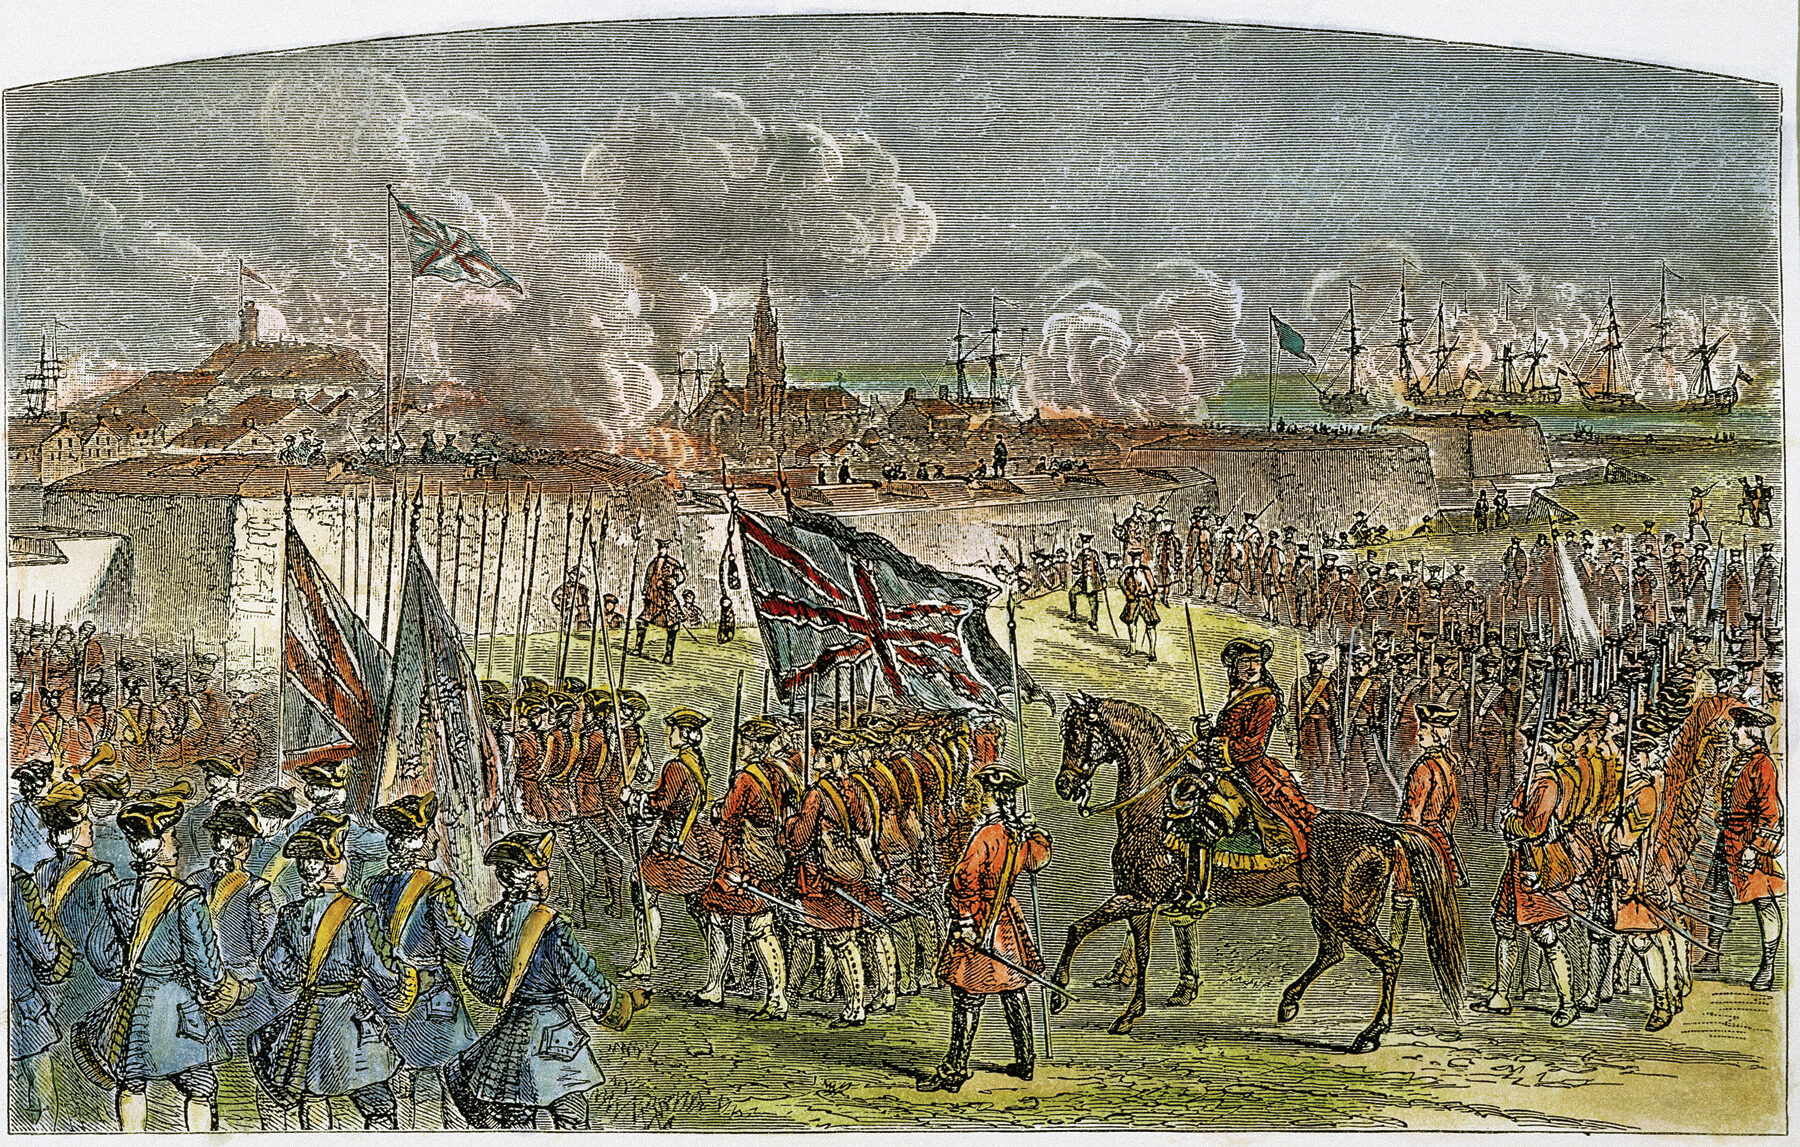 French forces at Louisbourg surrender to the British in June 1745. In the Treaty of Aix-la-Chapelle three years later, the British returned Louisbourg to the French in exchange for Madras in India, which had been captured by the French. The American colonists were outraged when they learned of the treaty’s terms.